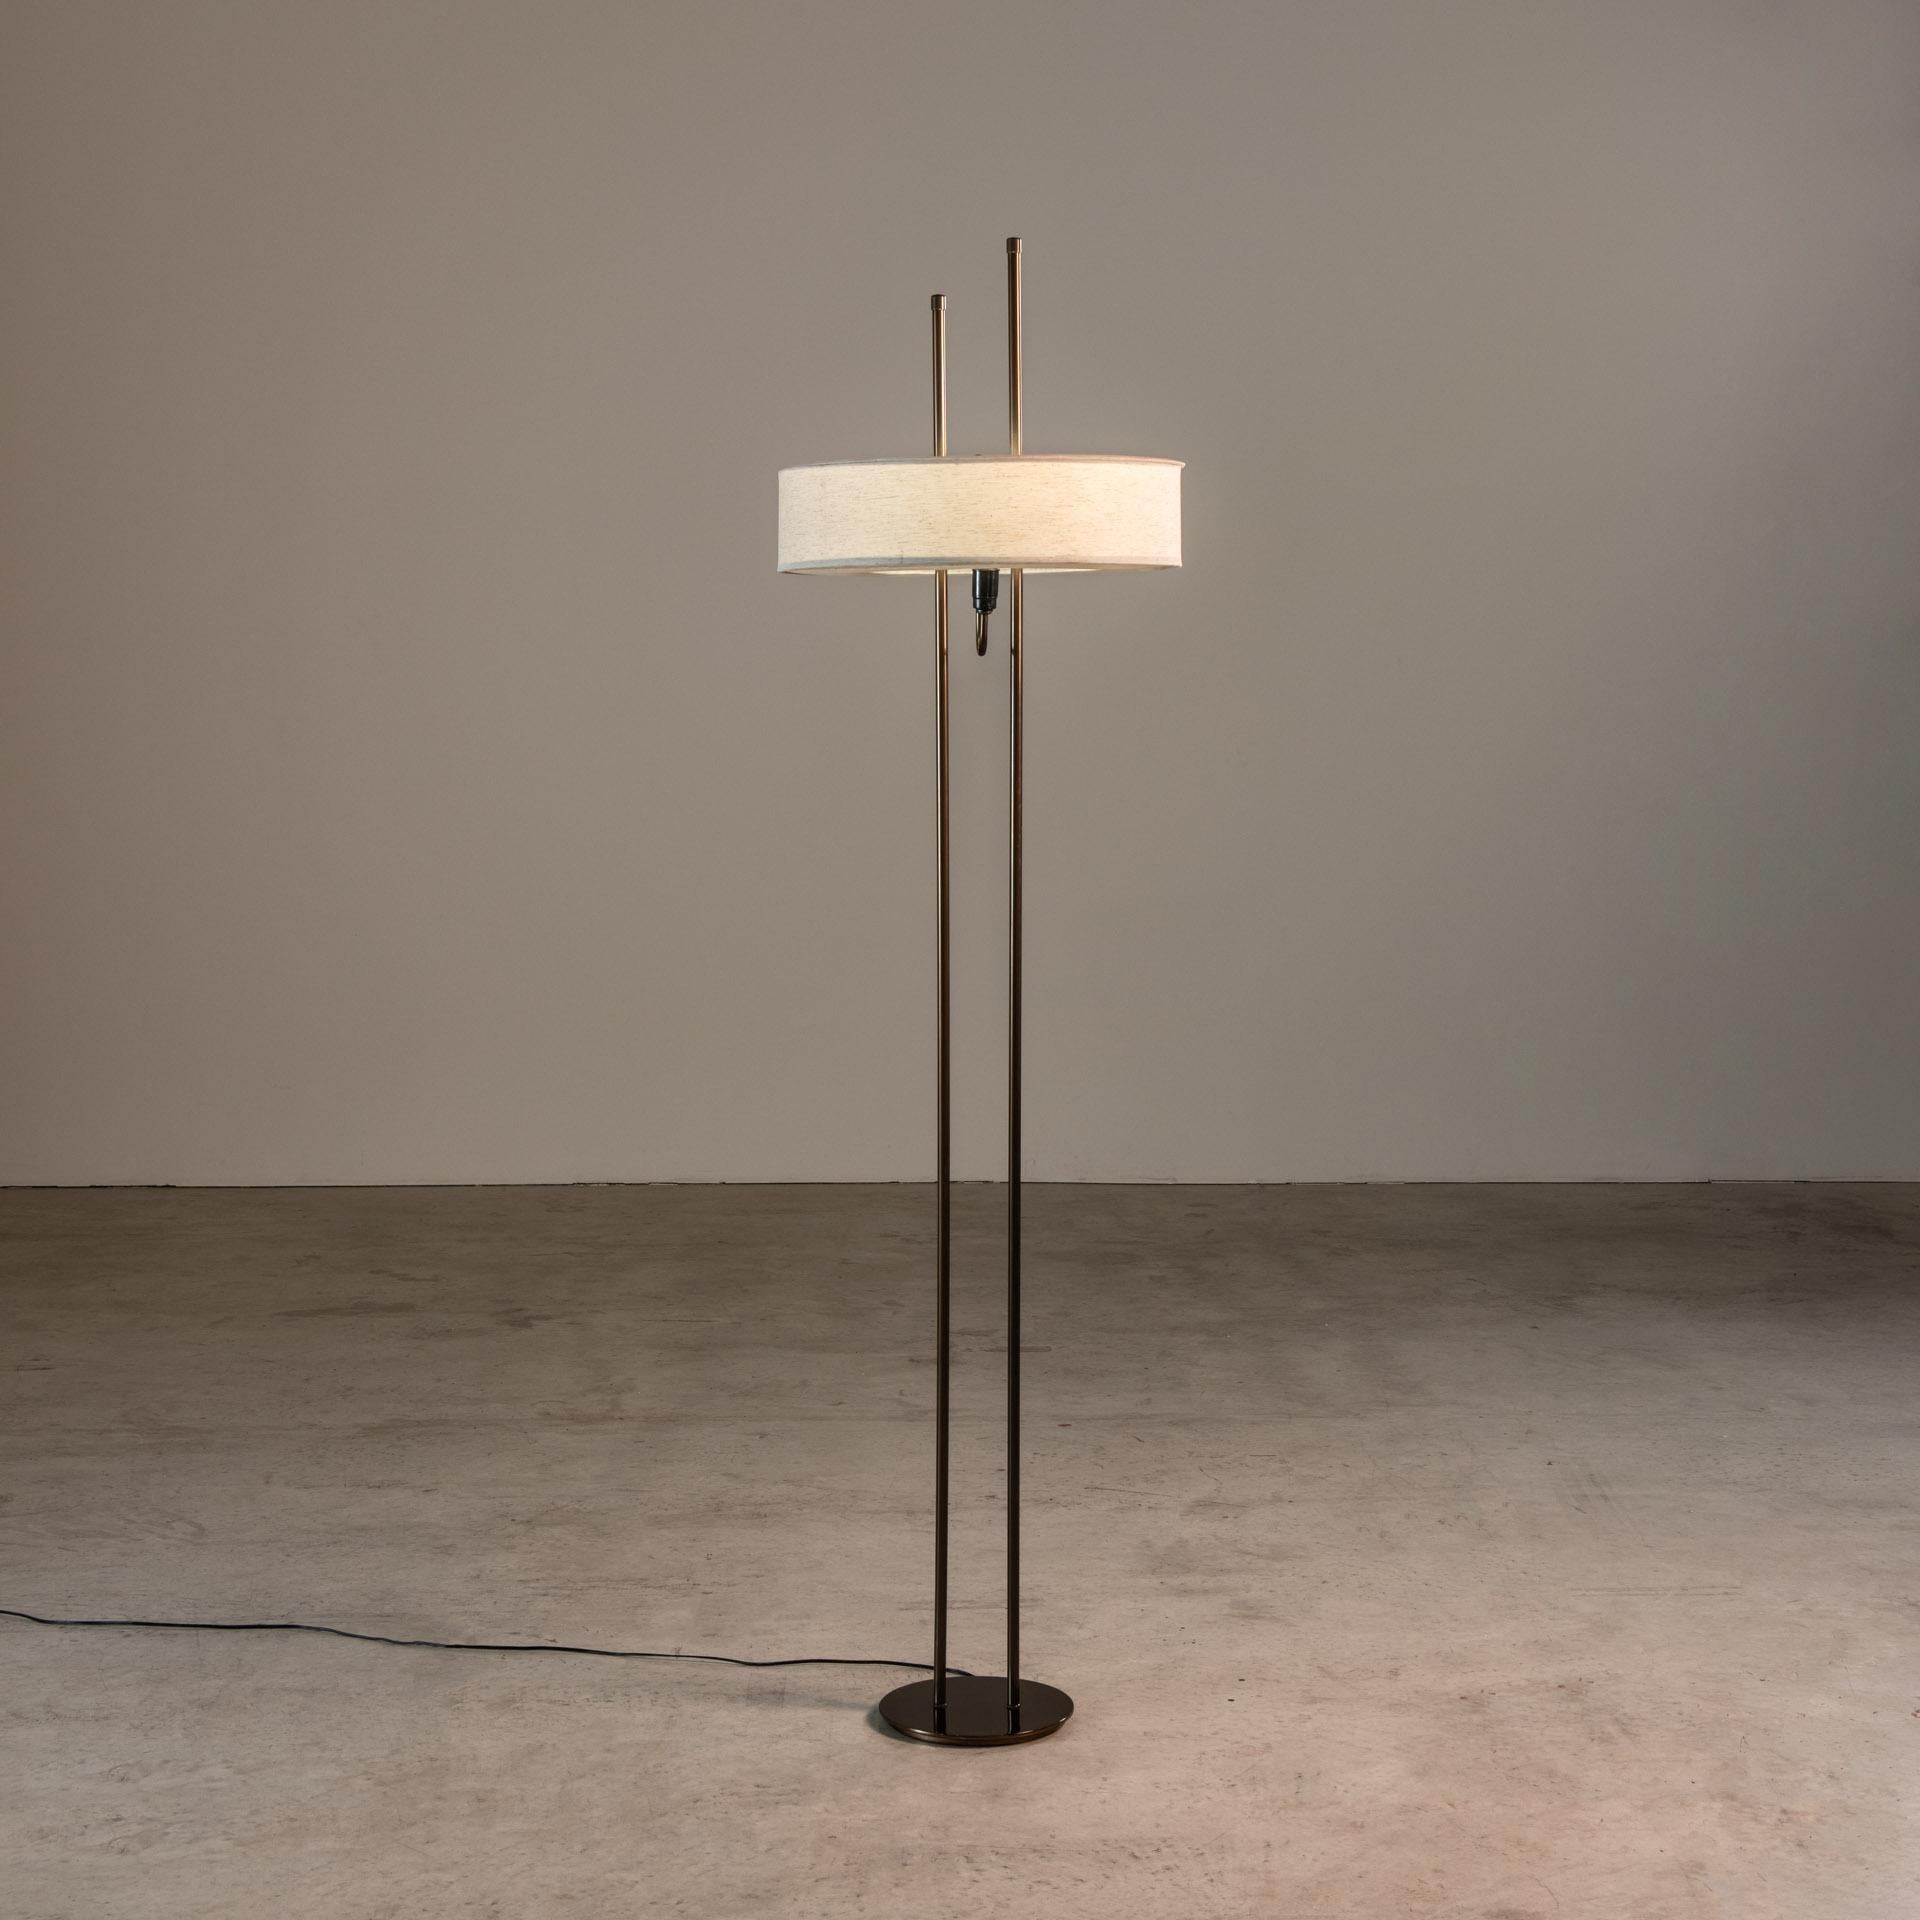 This floor lamp is a paragon of Dominici's design philosophy, which marries the timeless luster of brass with the tactile warmth of linen. The lamp's stature is defined by two parallel brass poles, rising in unison, an embodiment of strength and